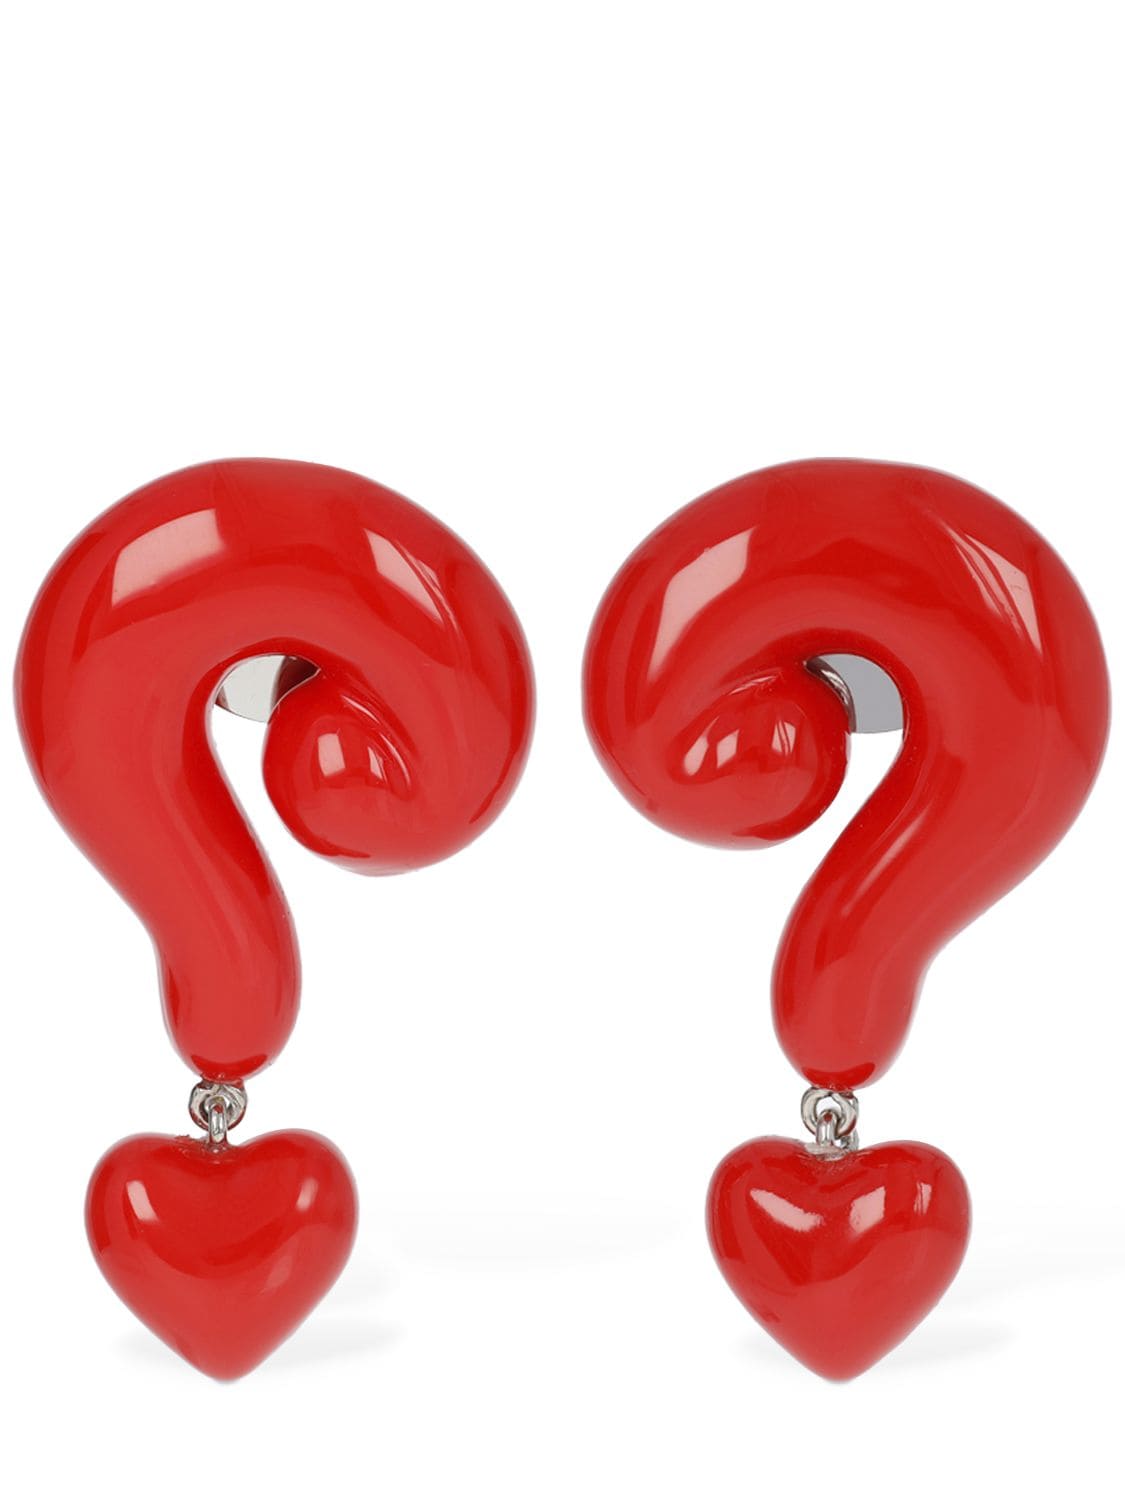 Inflatable Question Mark Earrings